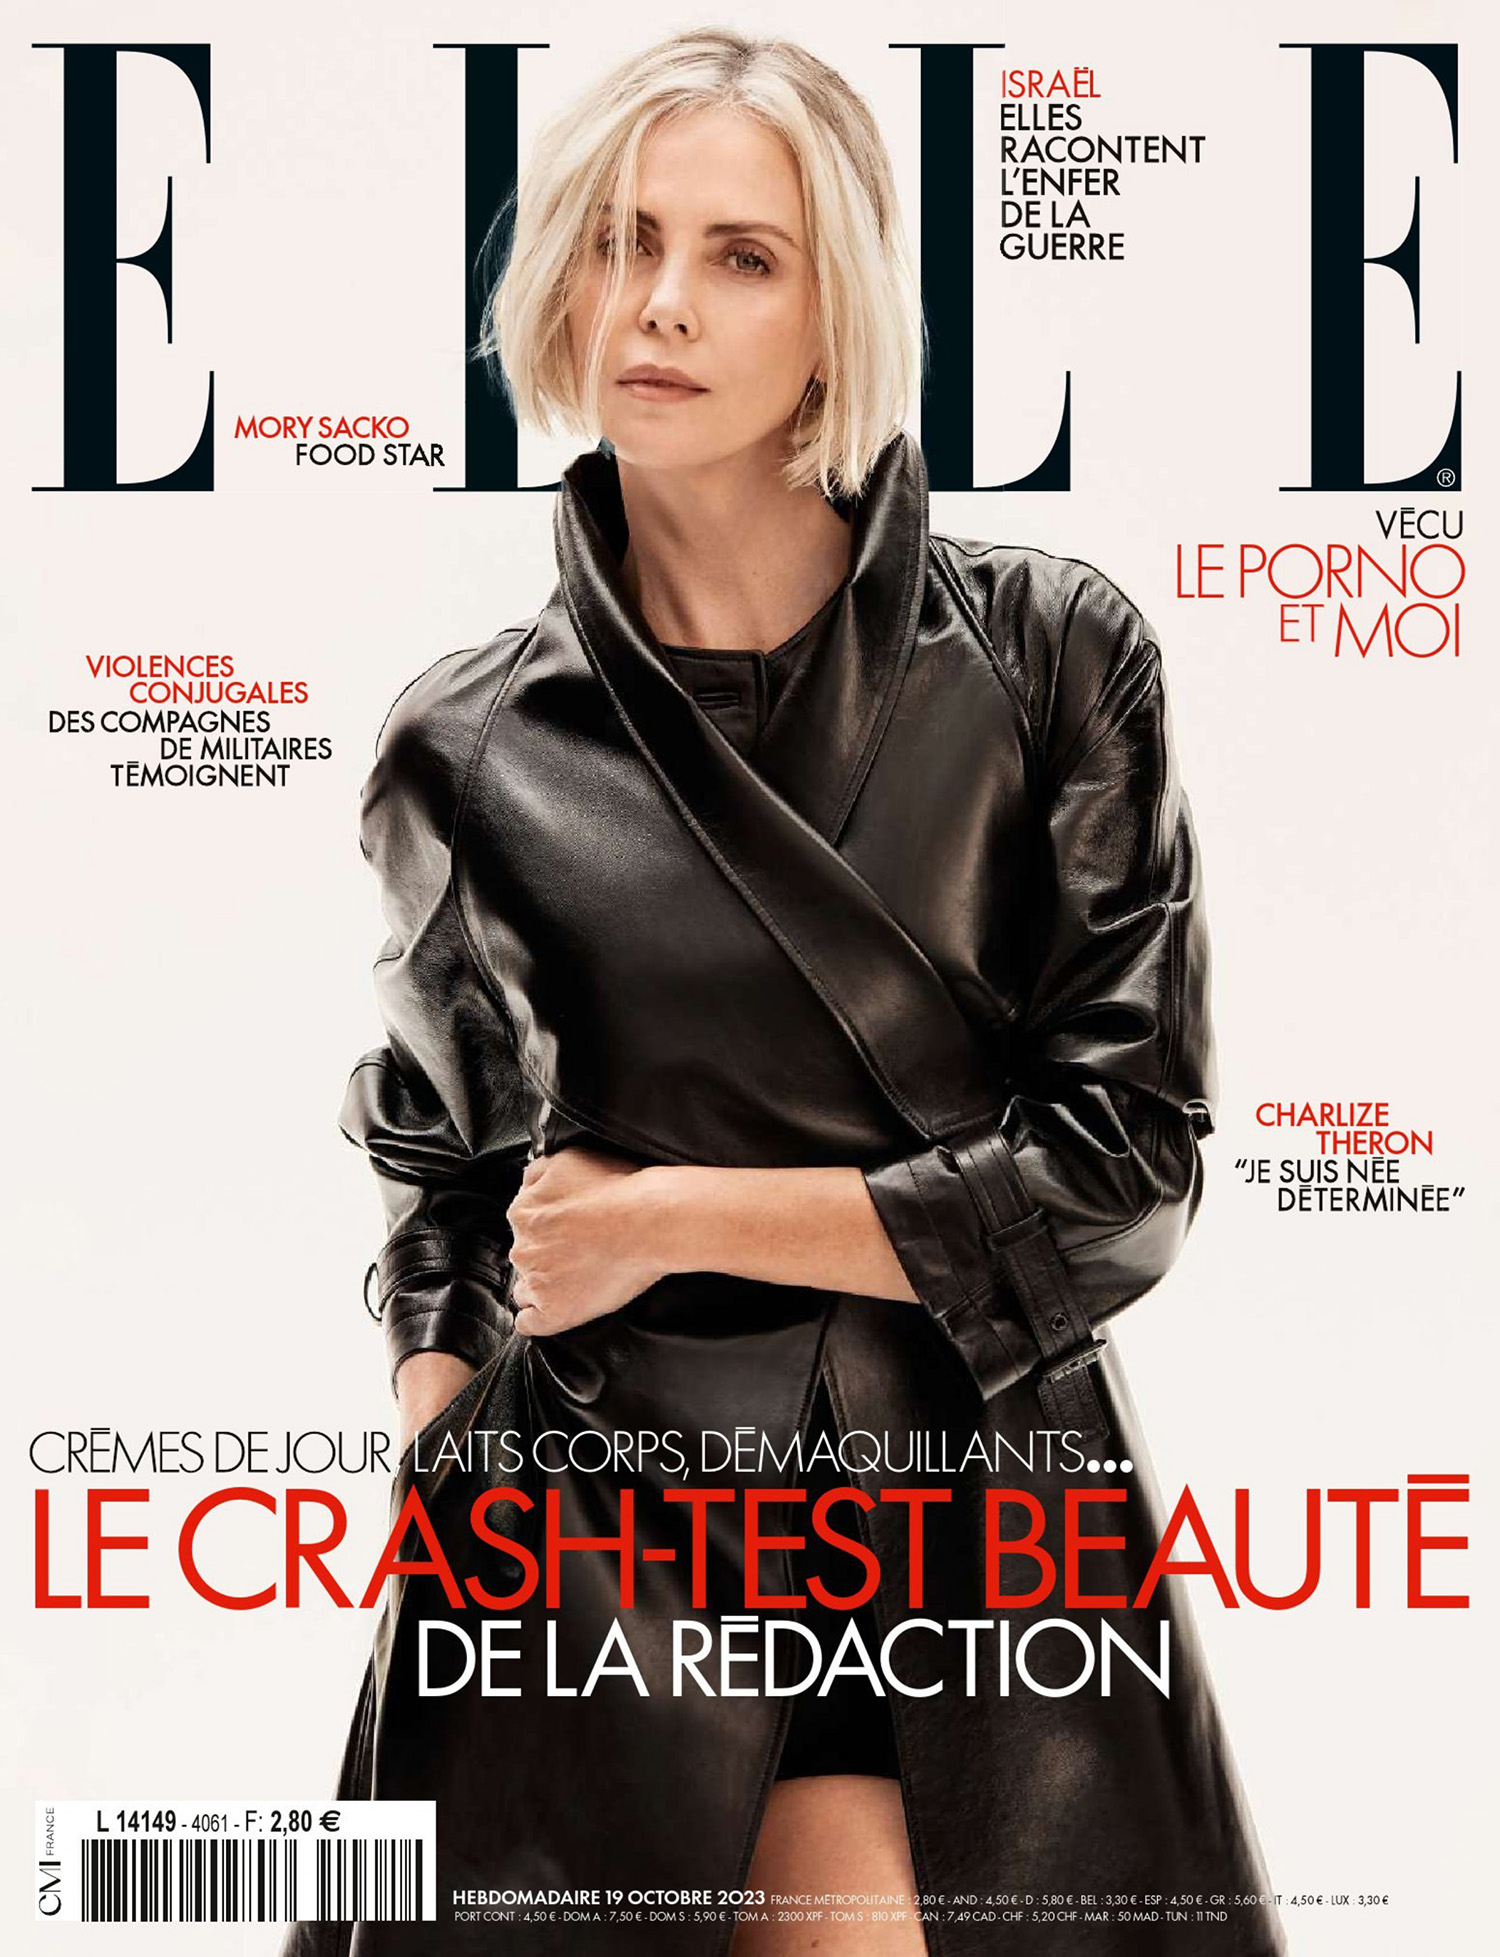 Charlize Theron in Dior on Elle France October 19th, 2023 by Josh Olins